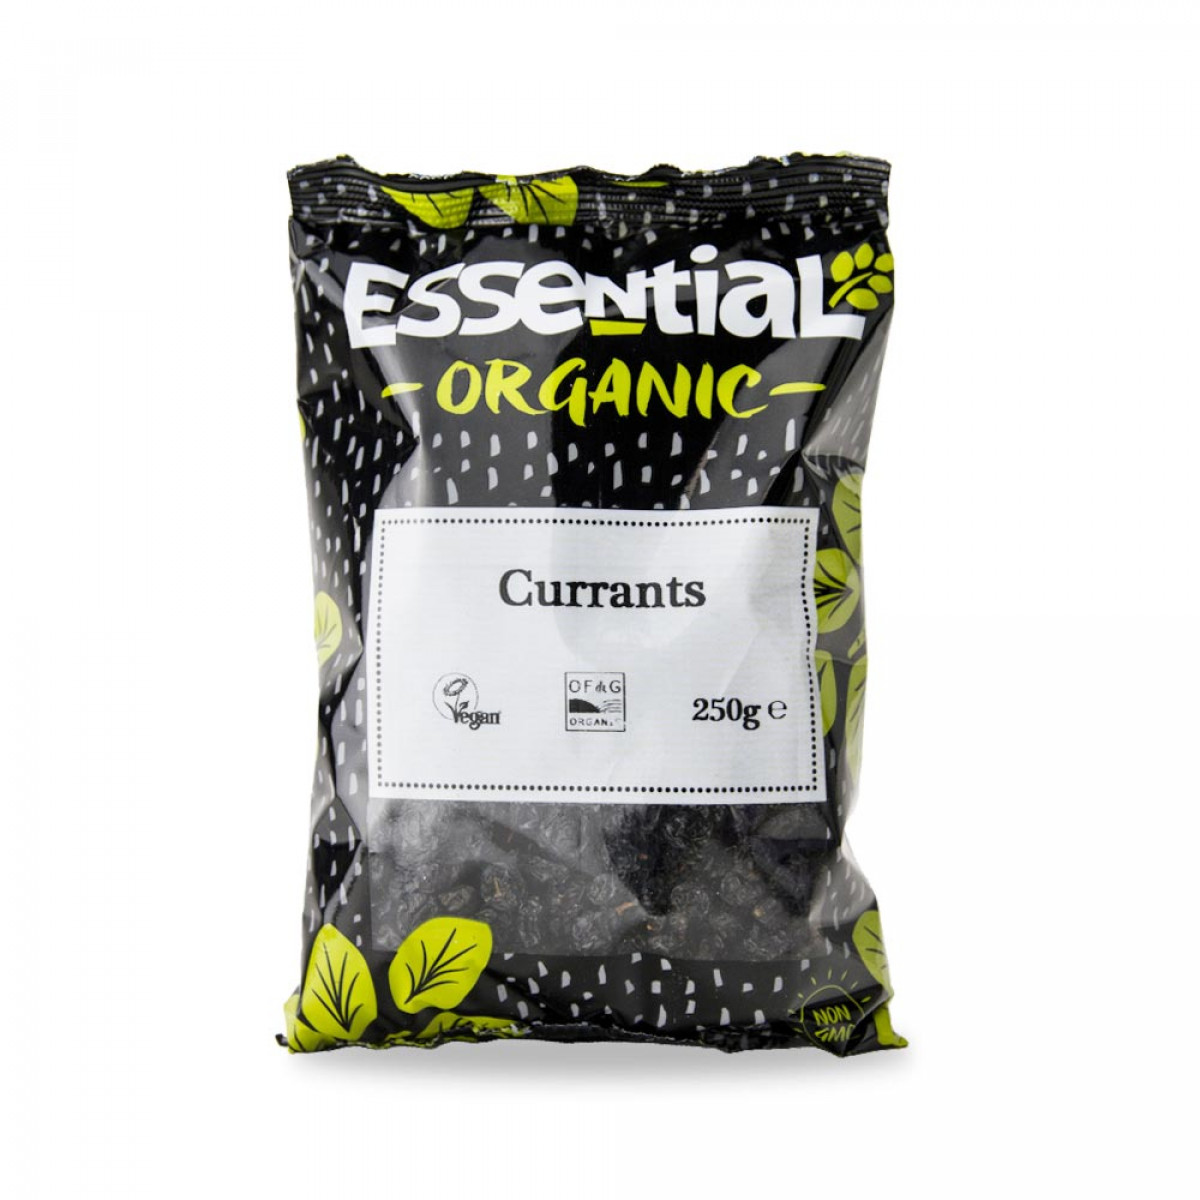 Product picture for Currants